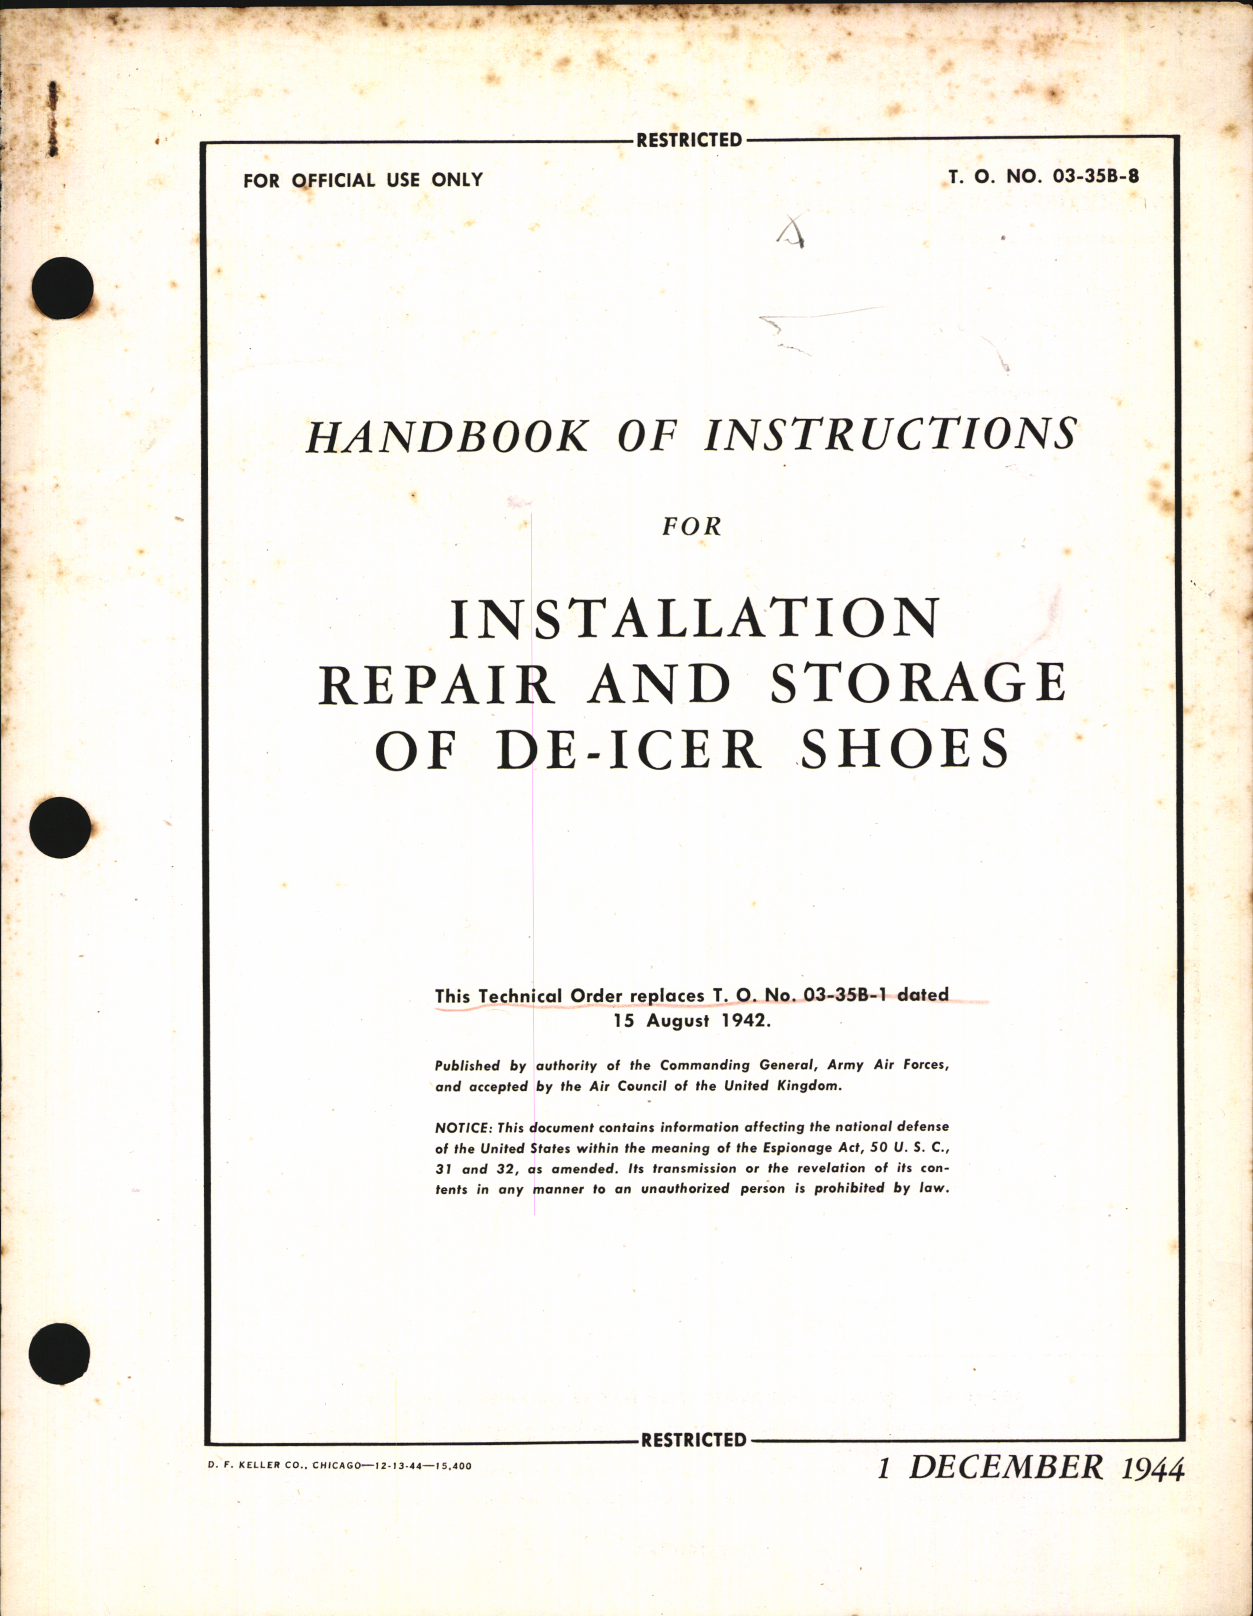 Sample page 1 from AirCorps Library document: Handbook of Instructions for Installation, Repair, and Storage of De-Icer Shoes